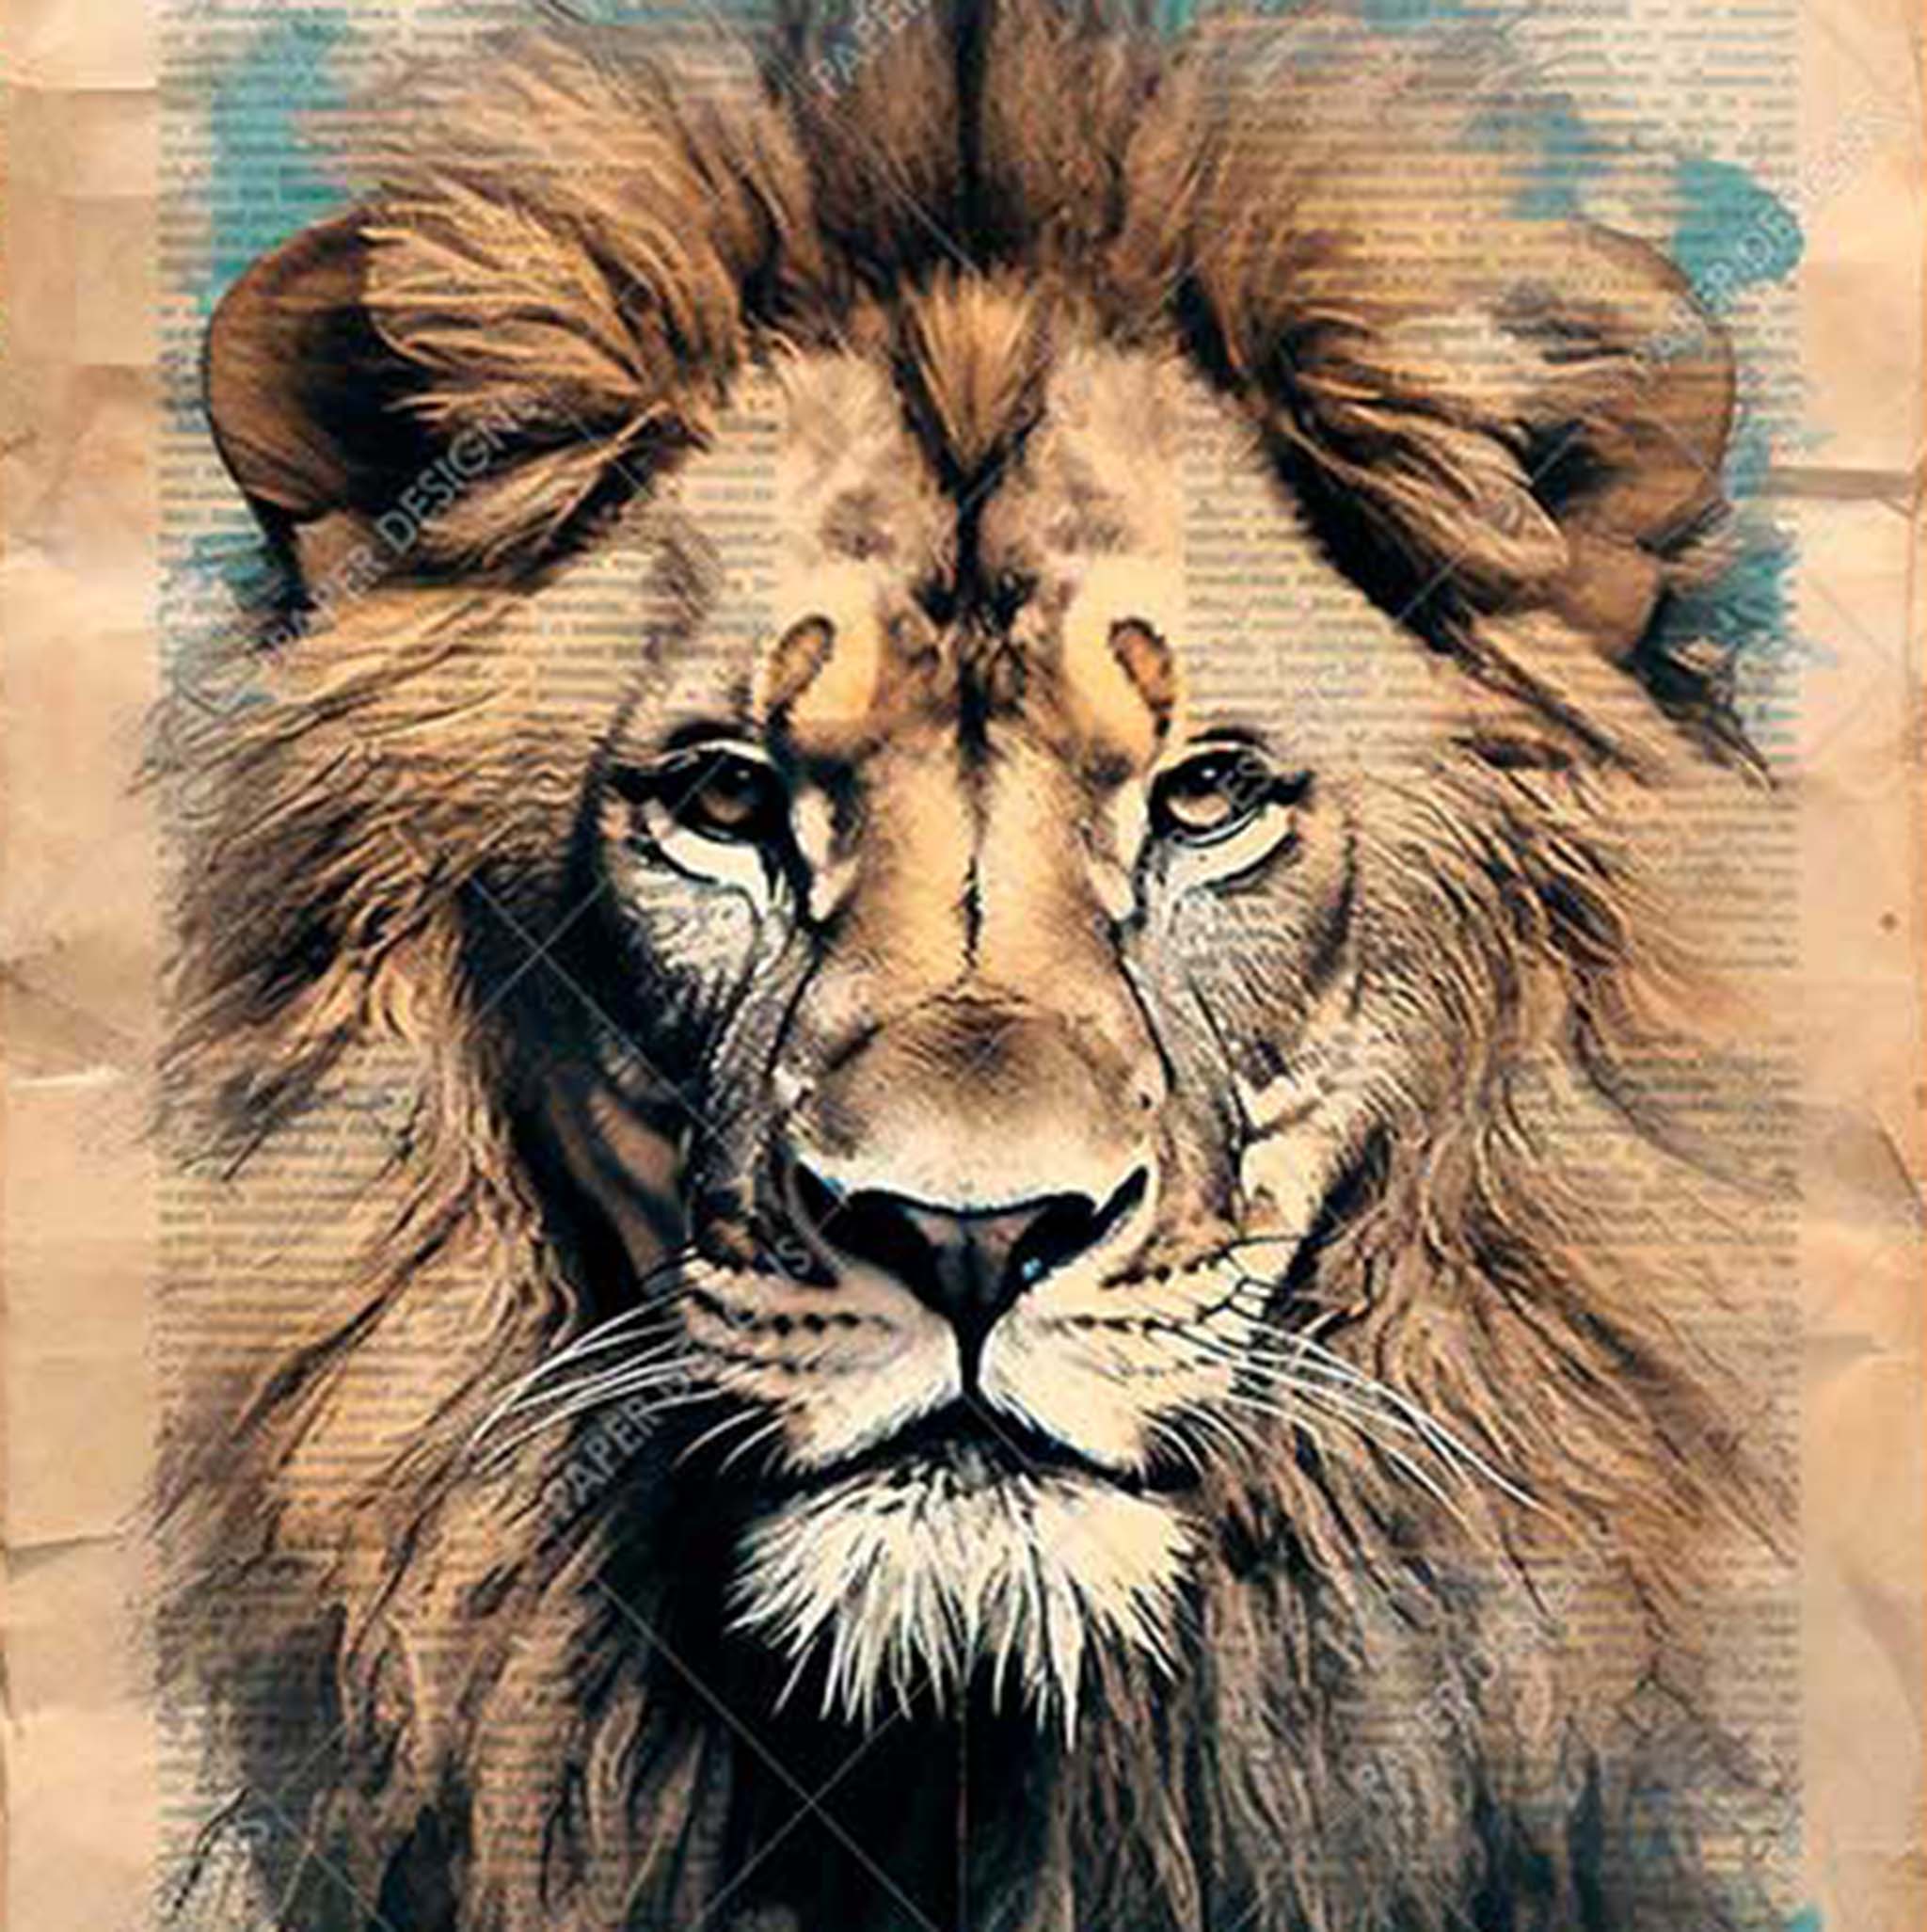 A4 rice paper design that features a vintage sepia tone background and a majestic lion.